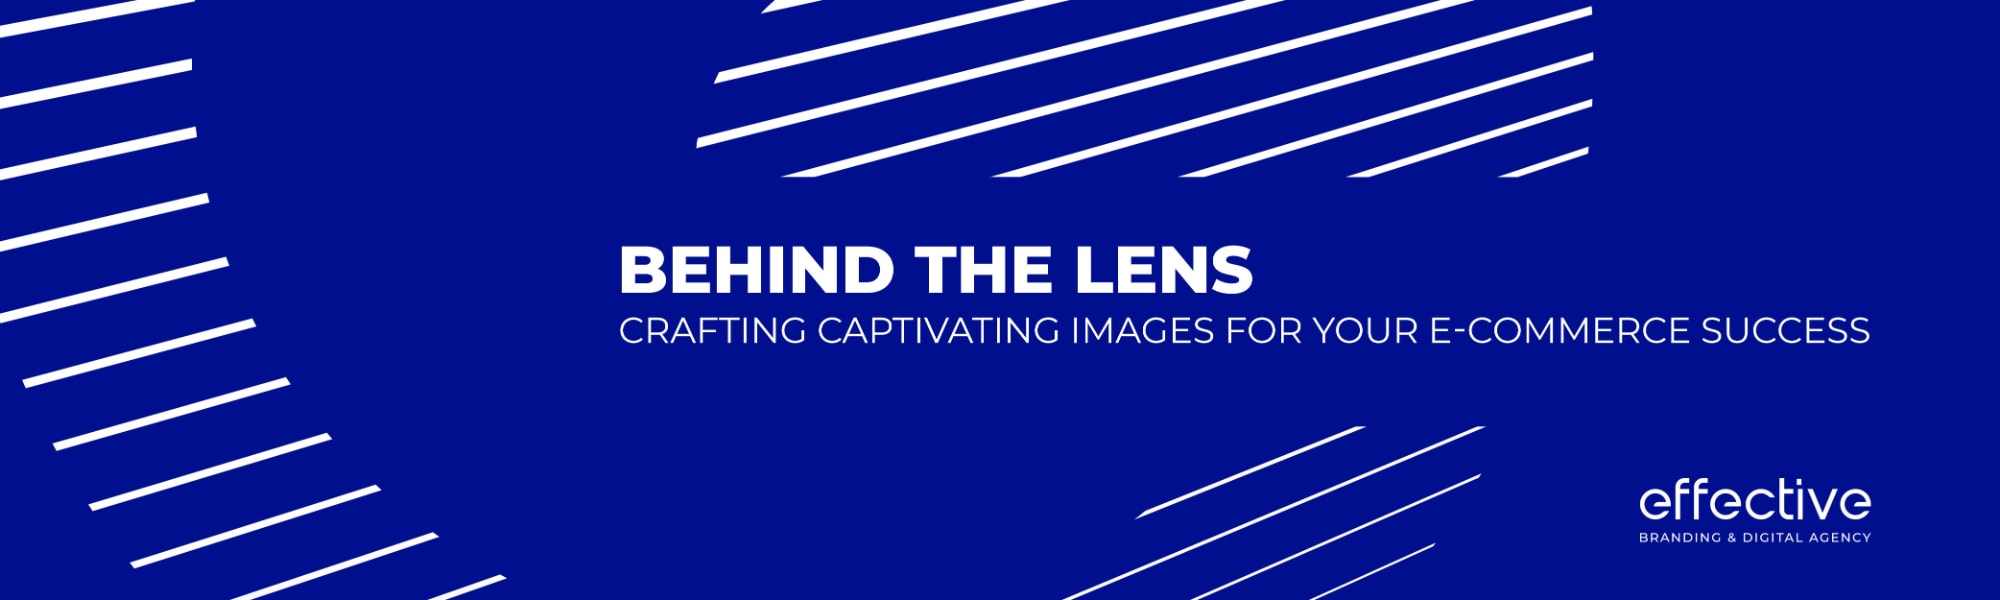 Behind the Lens Crafting Captivating Images for Your E Commerce Success